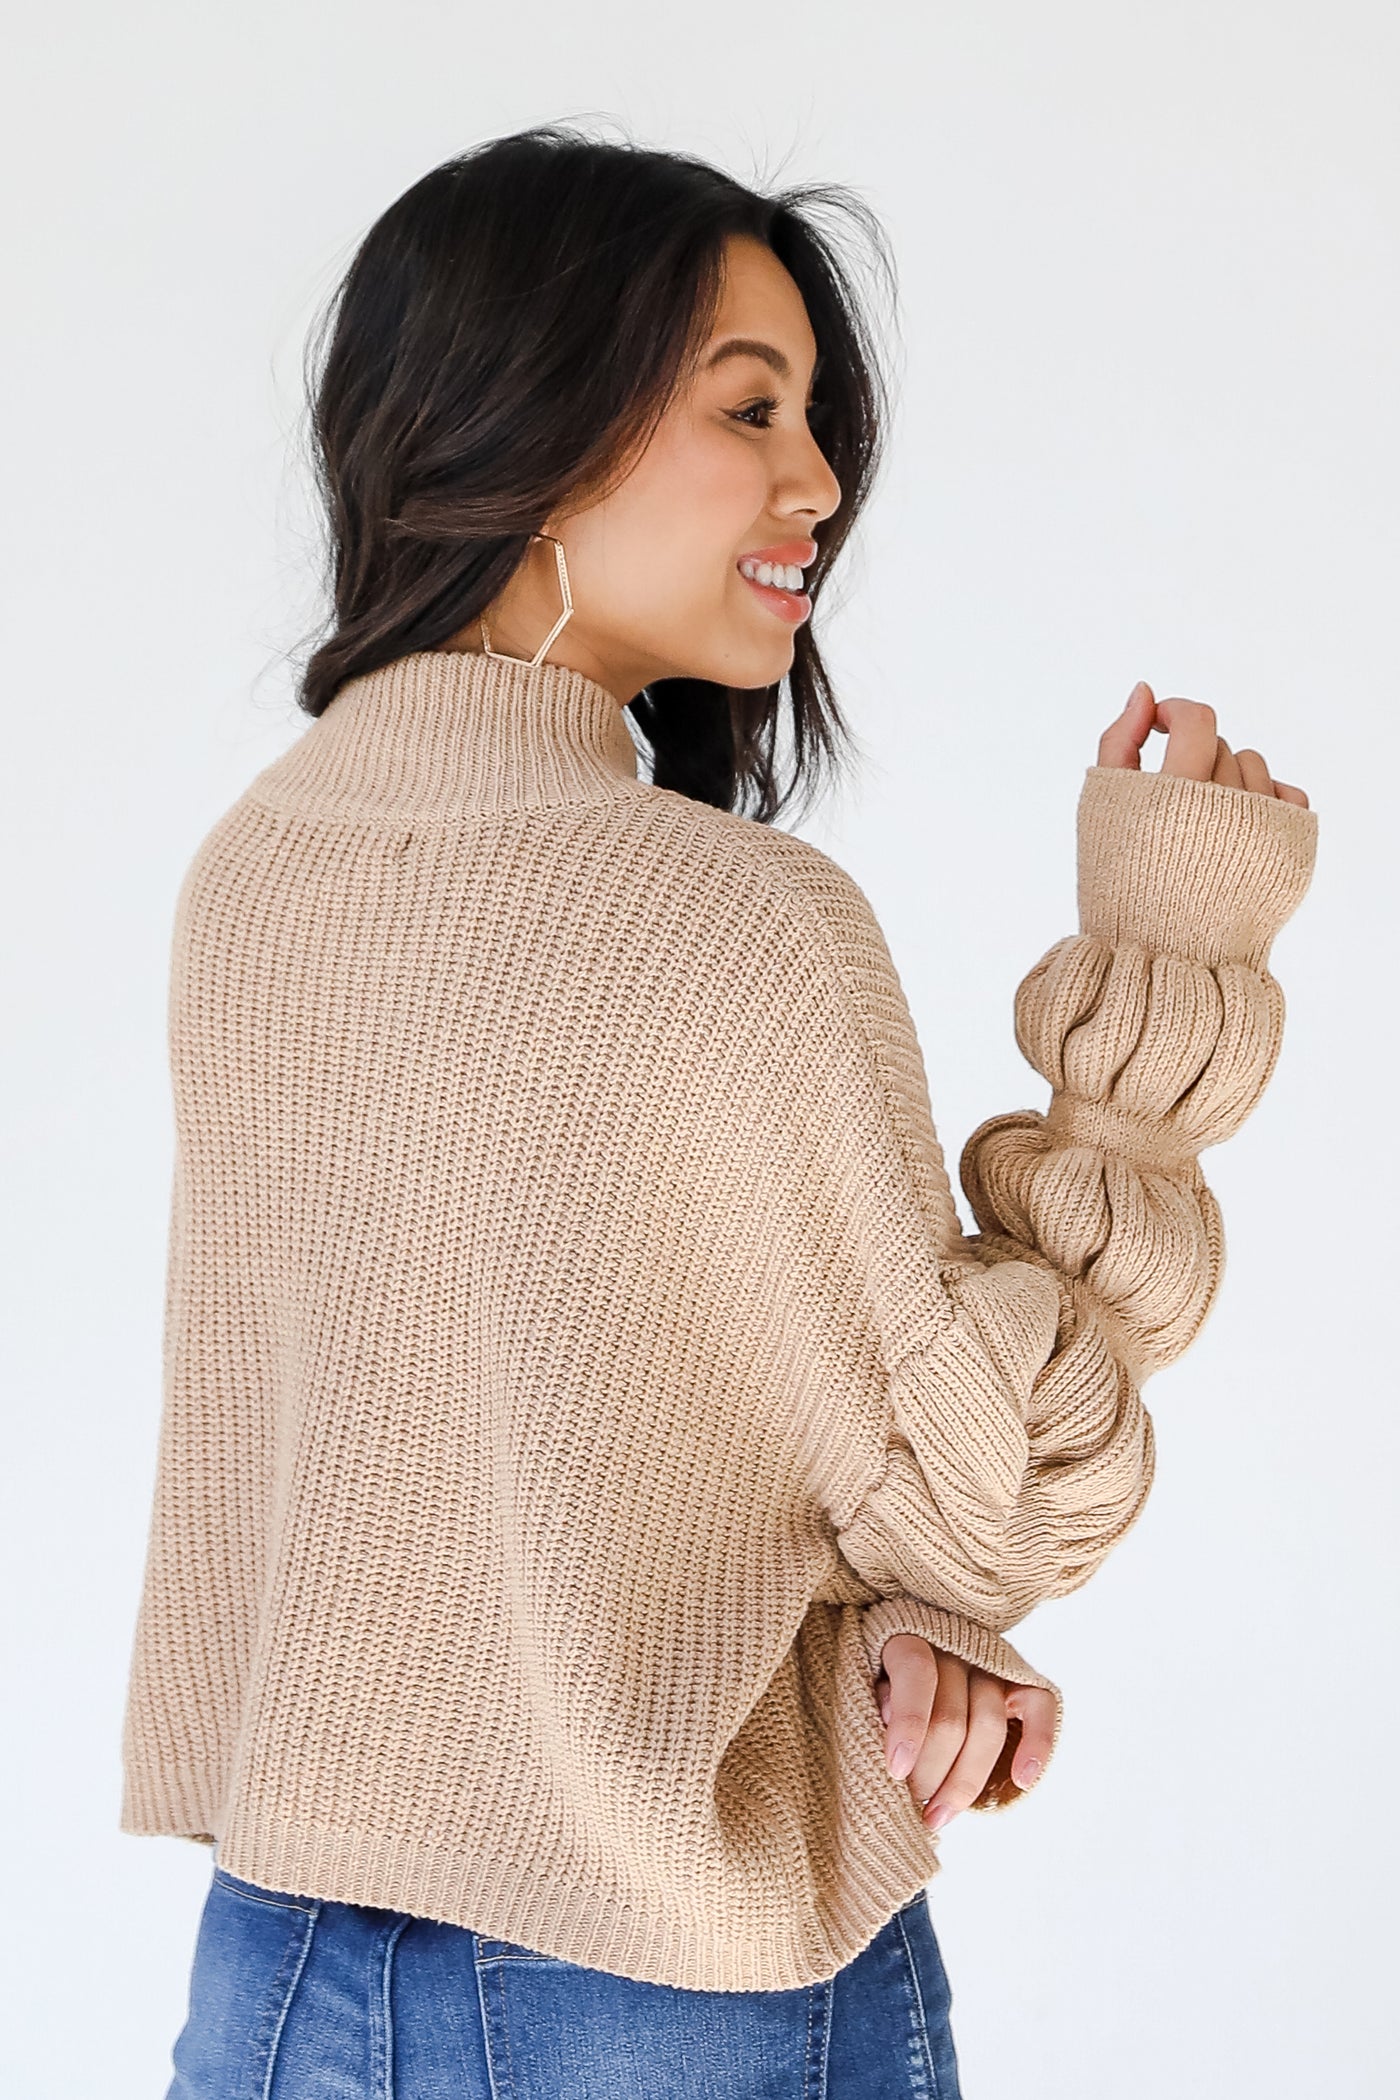 Statement Sleeve Sweater back view